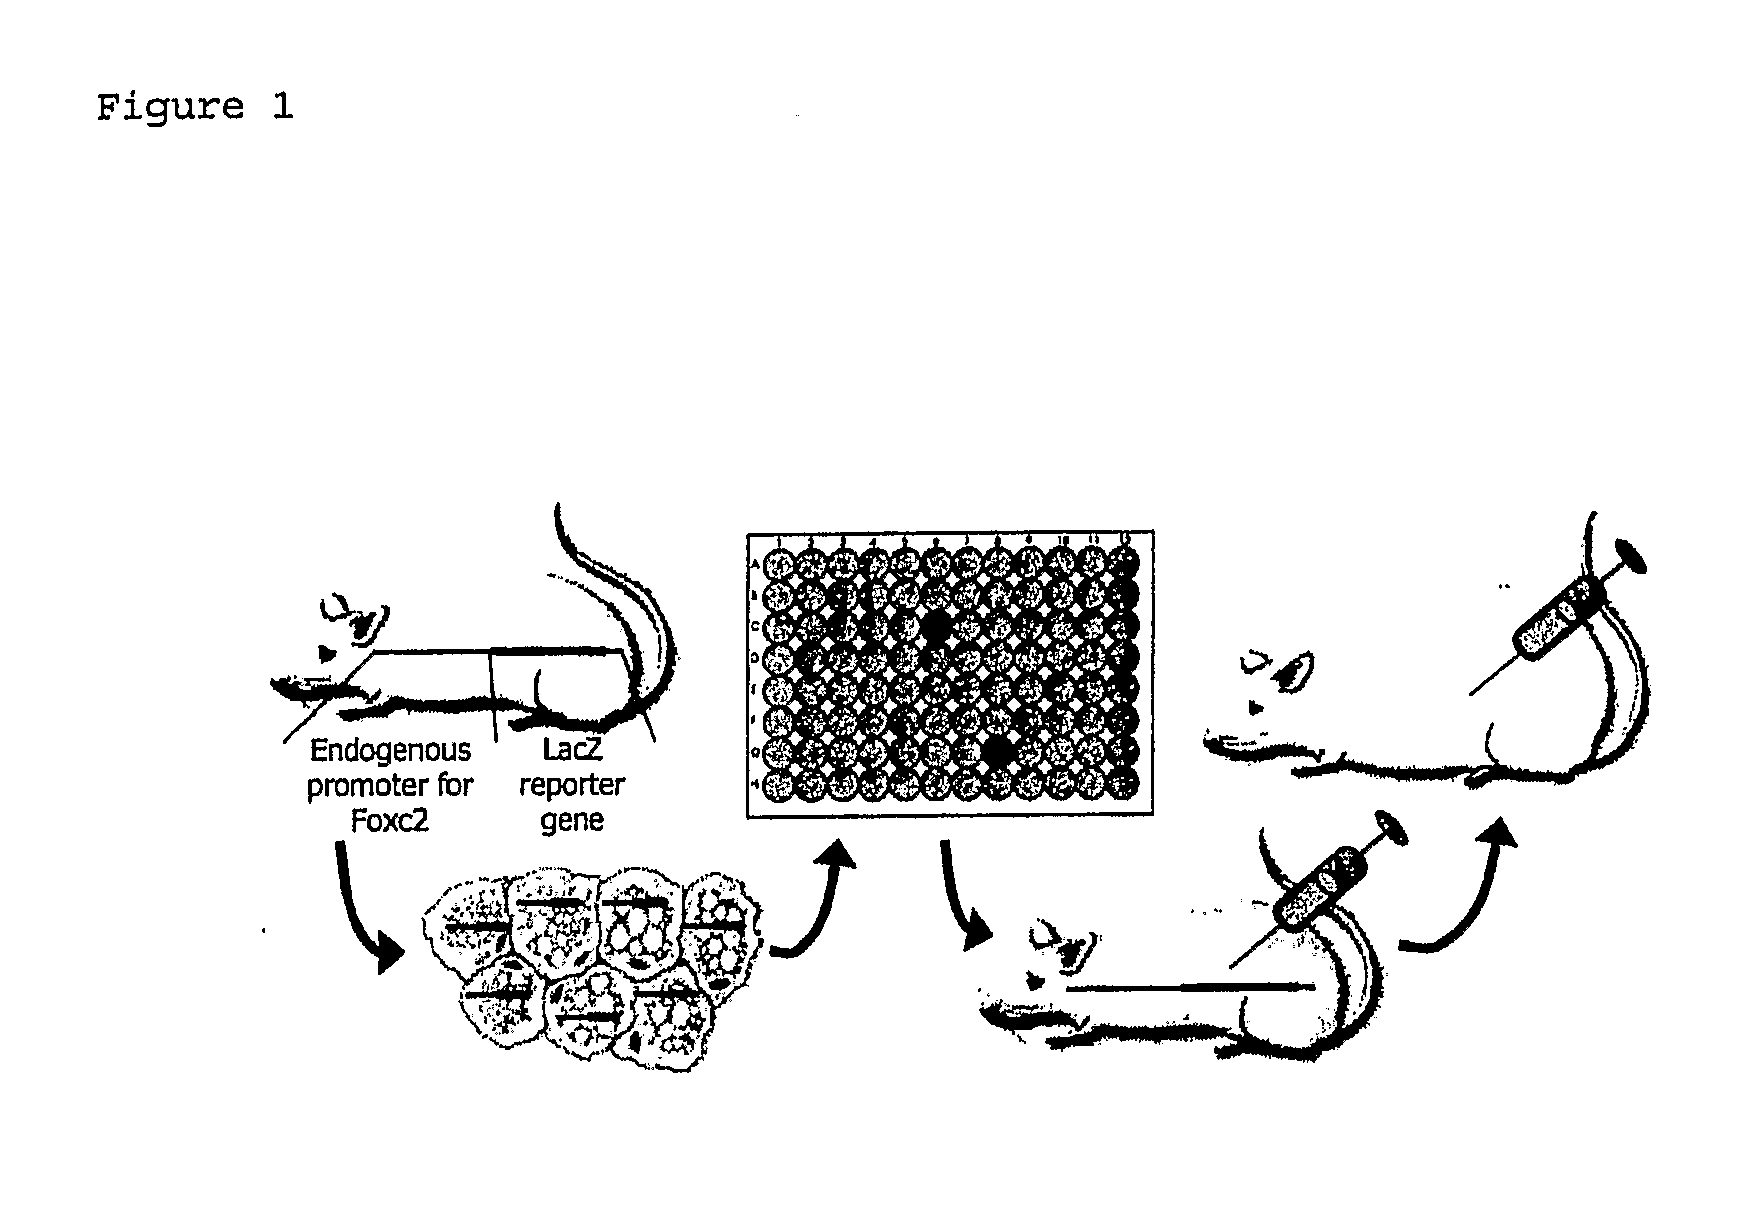 Method For Monitoring the Effect of Compounds on Foxc2 Expression